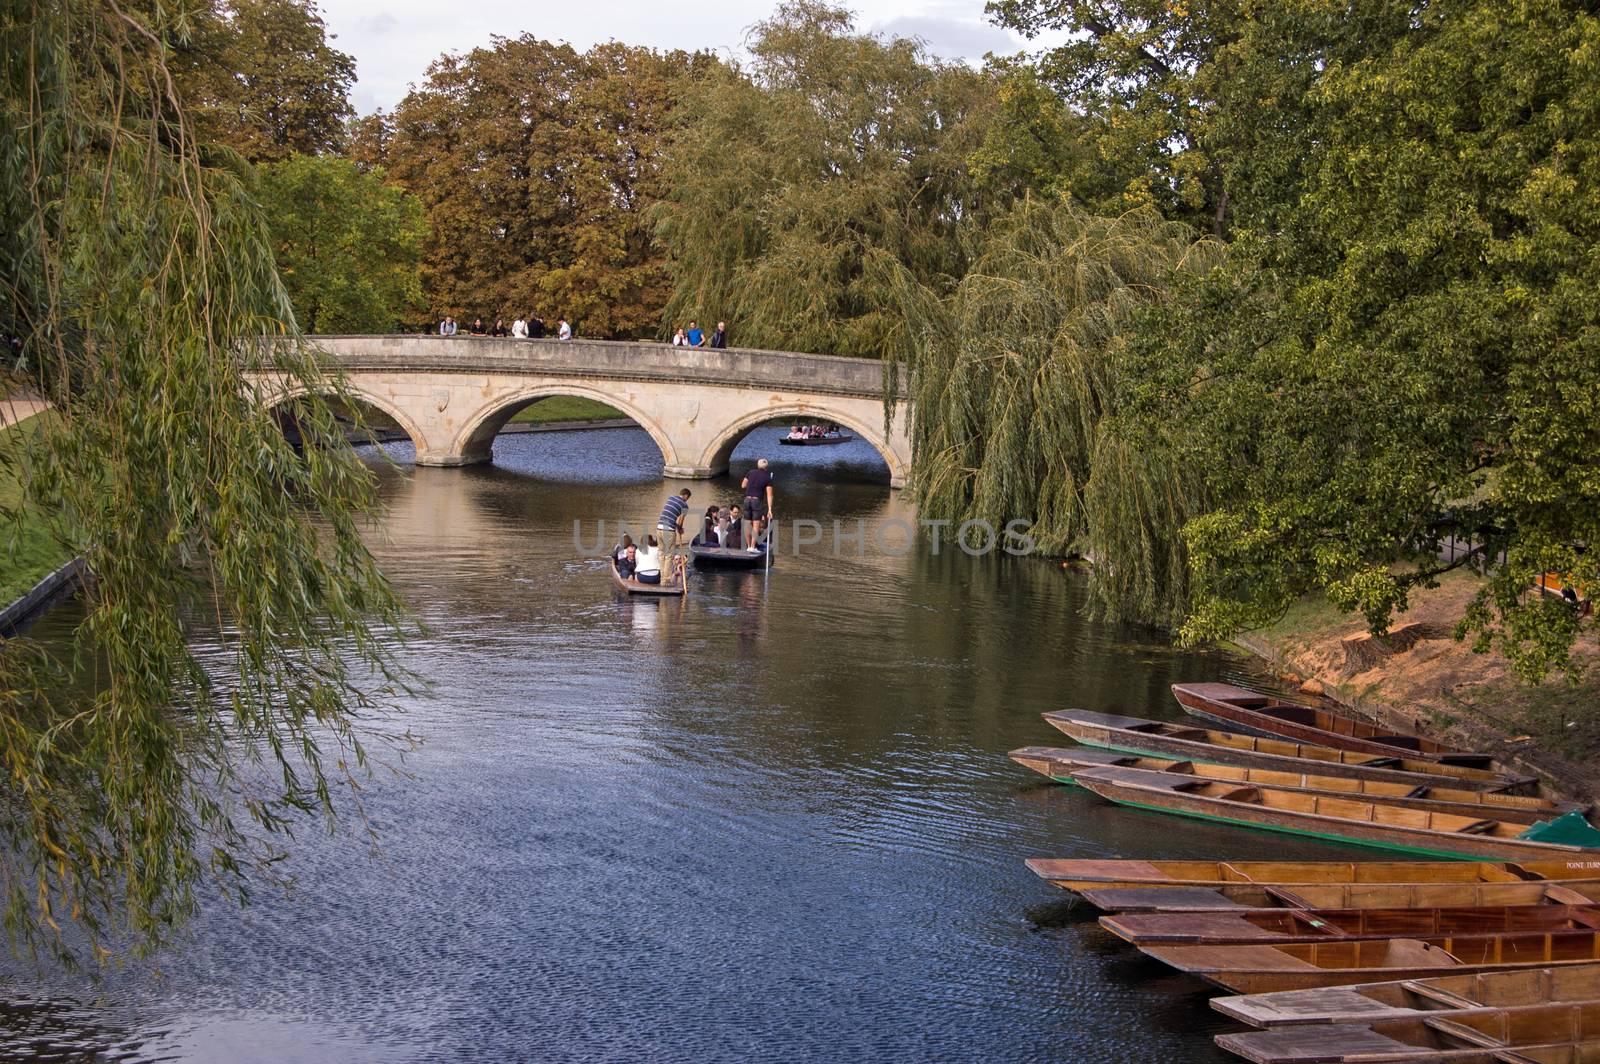 Punting in Cambridge by BasPhoto